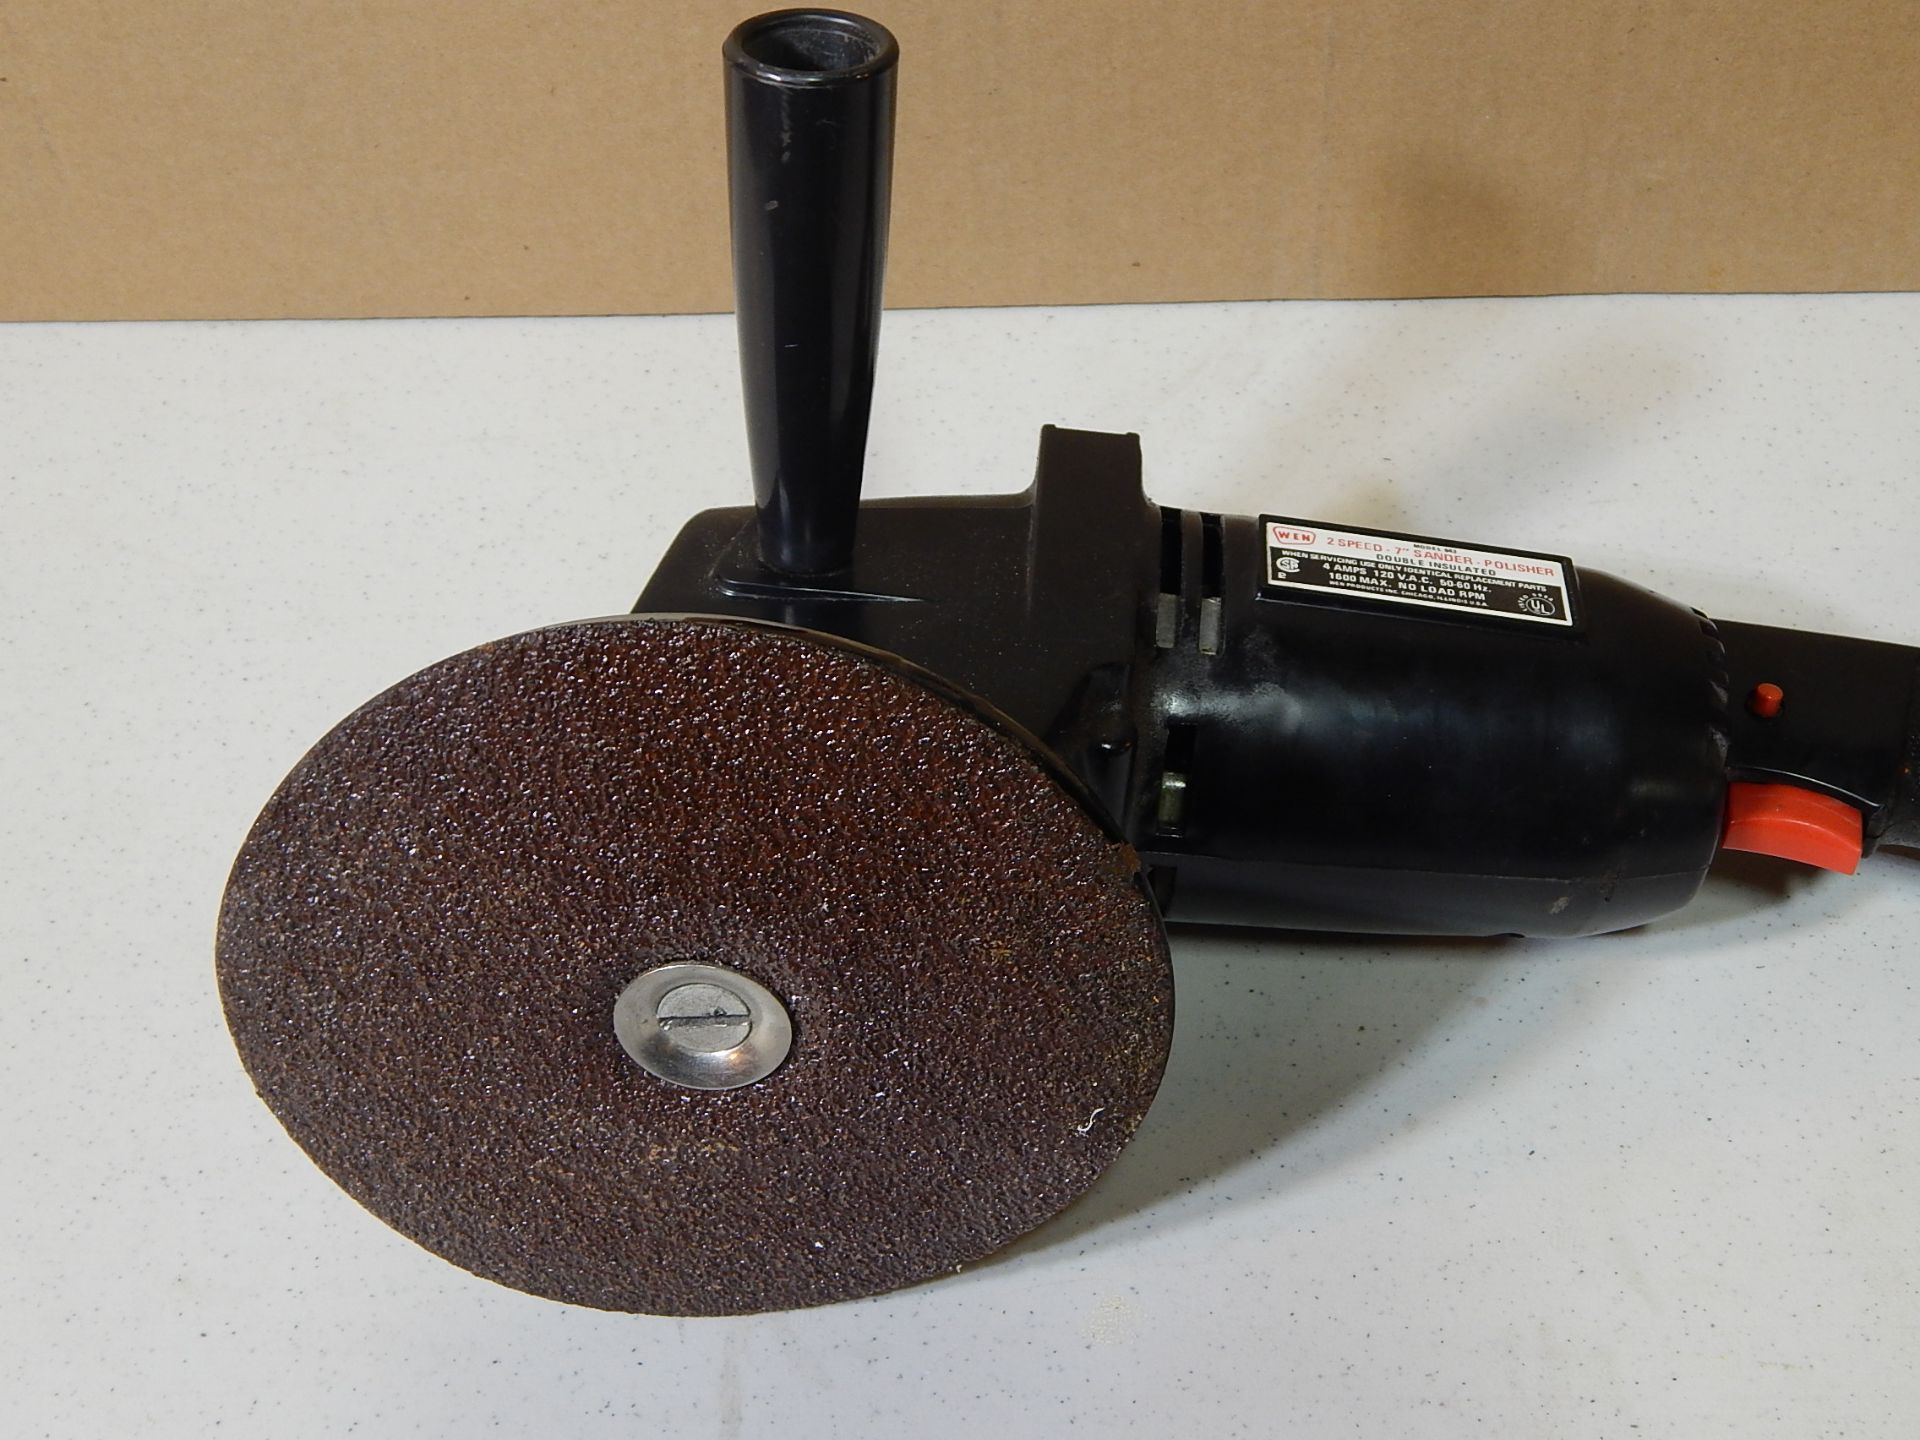 WEN 7 Inch Right Angle Sander/Polisher - Image 4 of 4